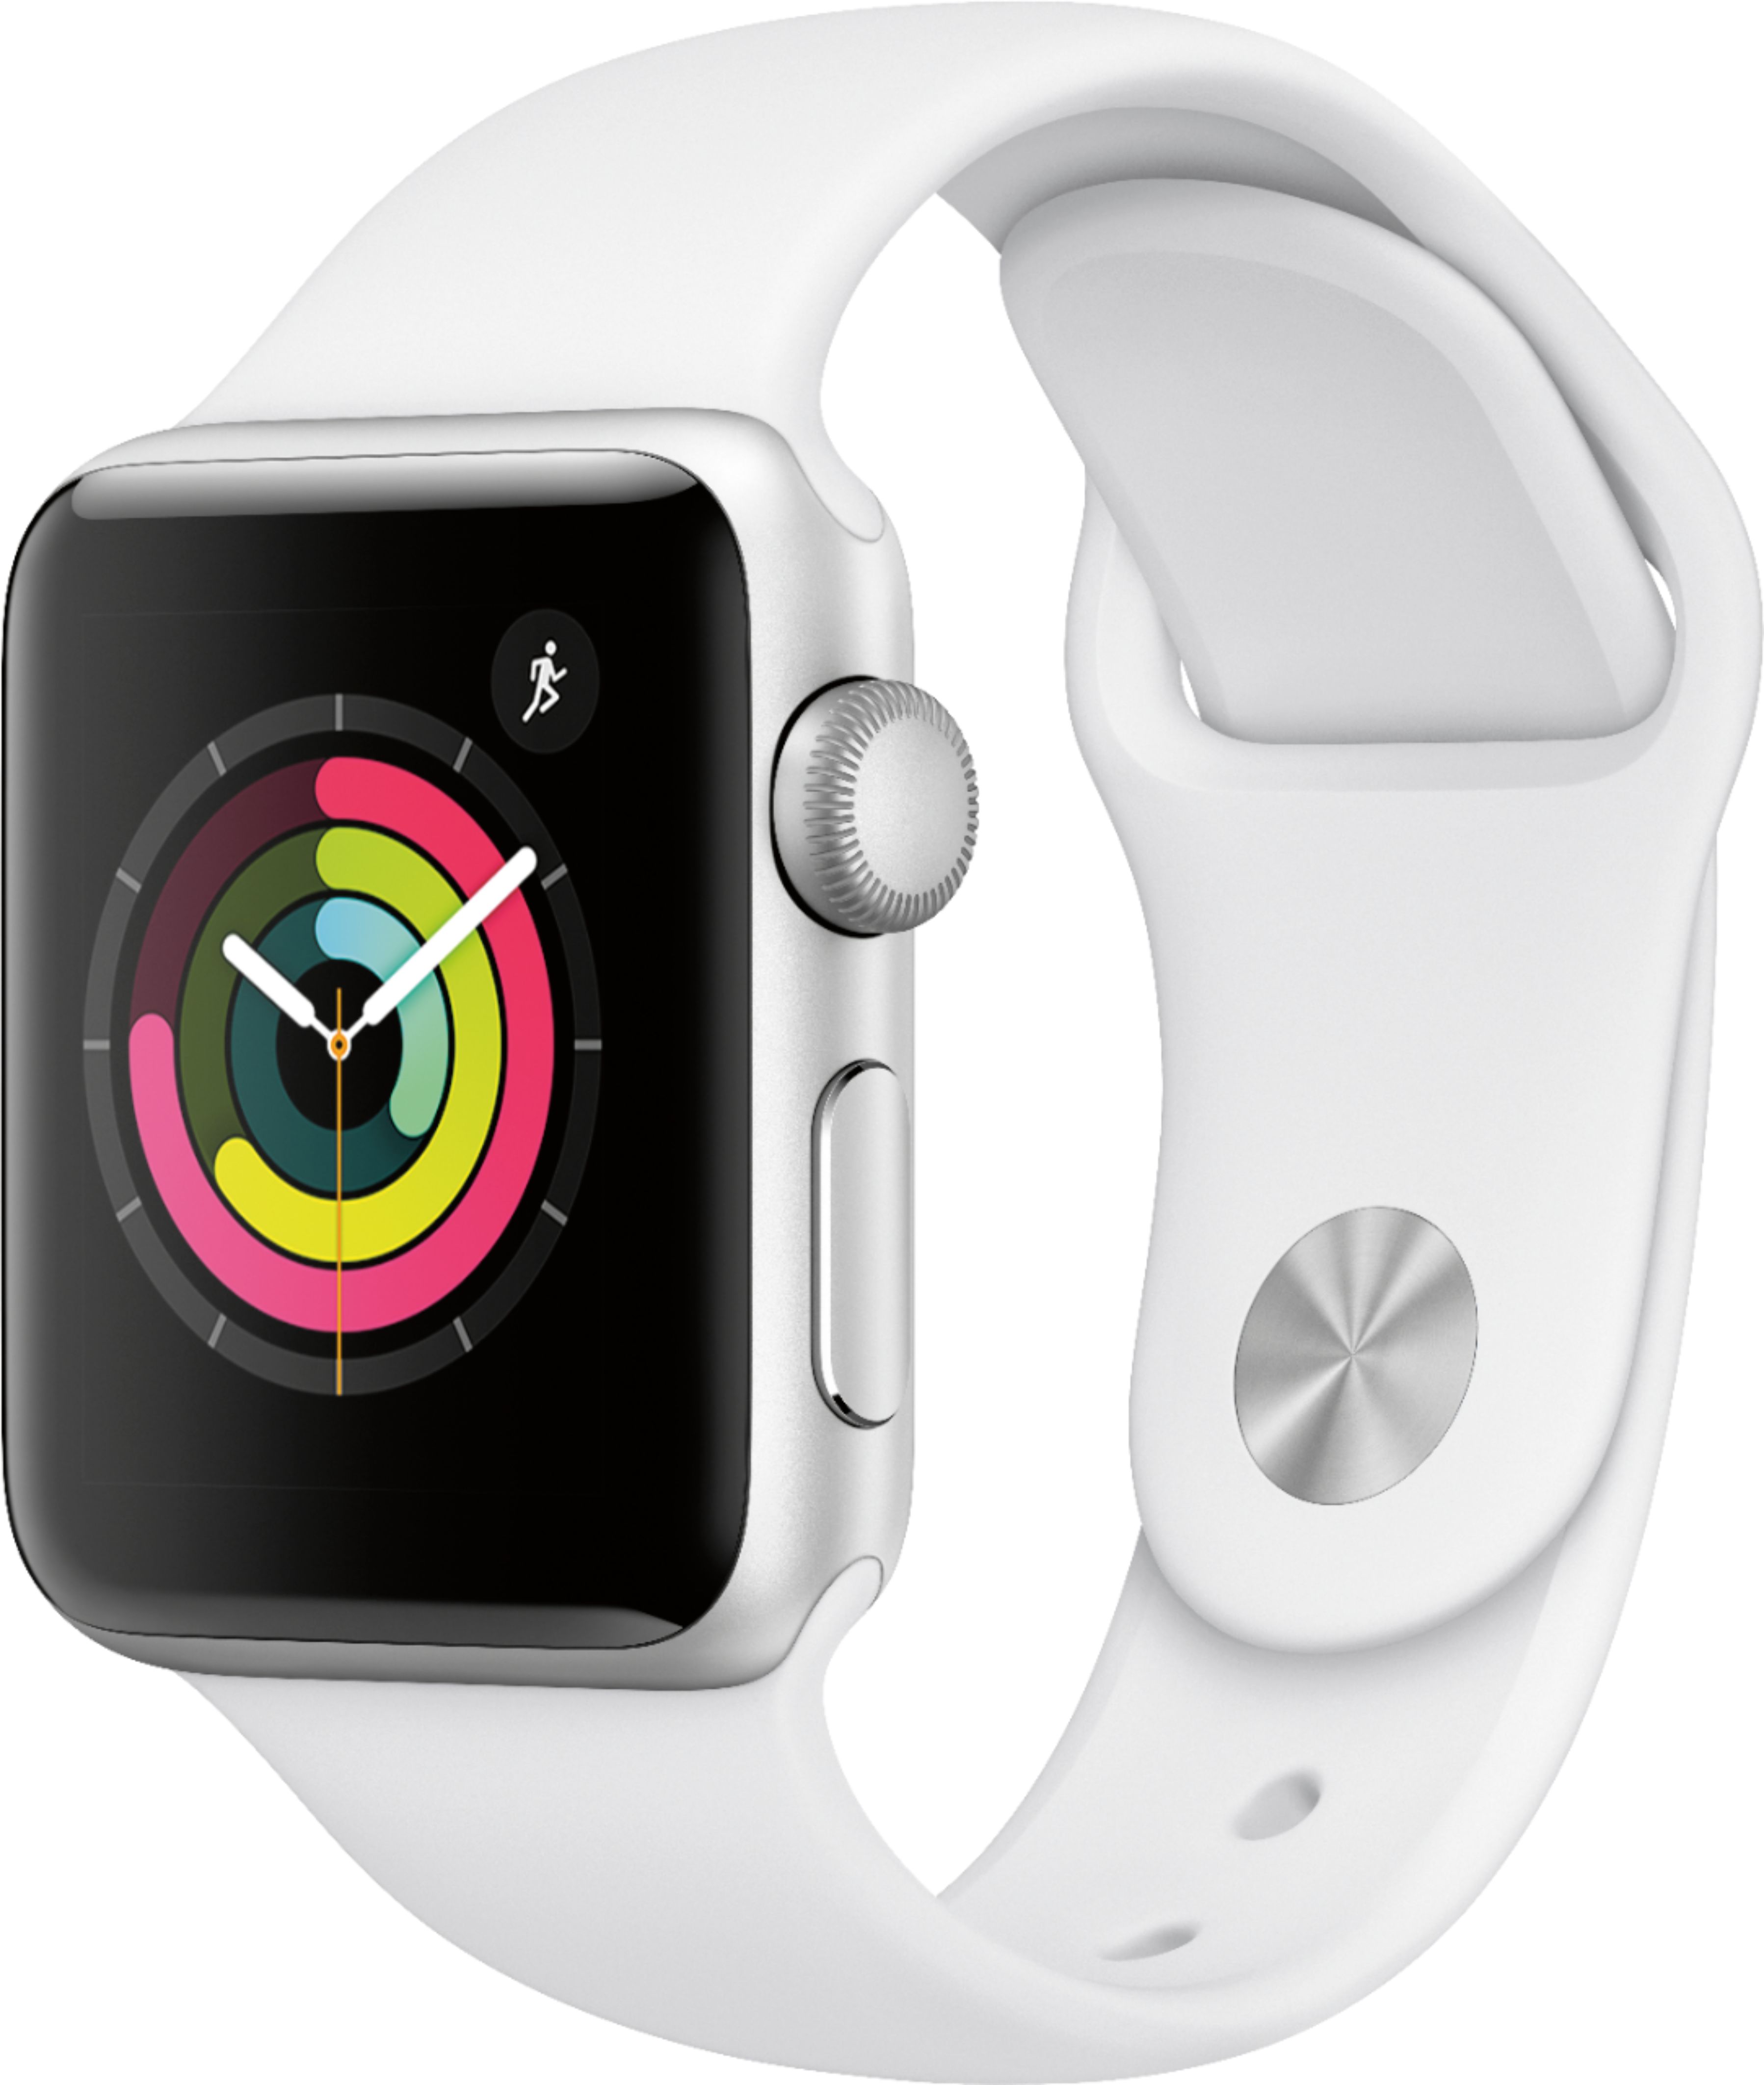 Apple Watch Series 3 (GPS) 38mm Aluminum Case with White Sport 